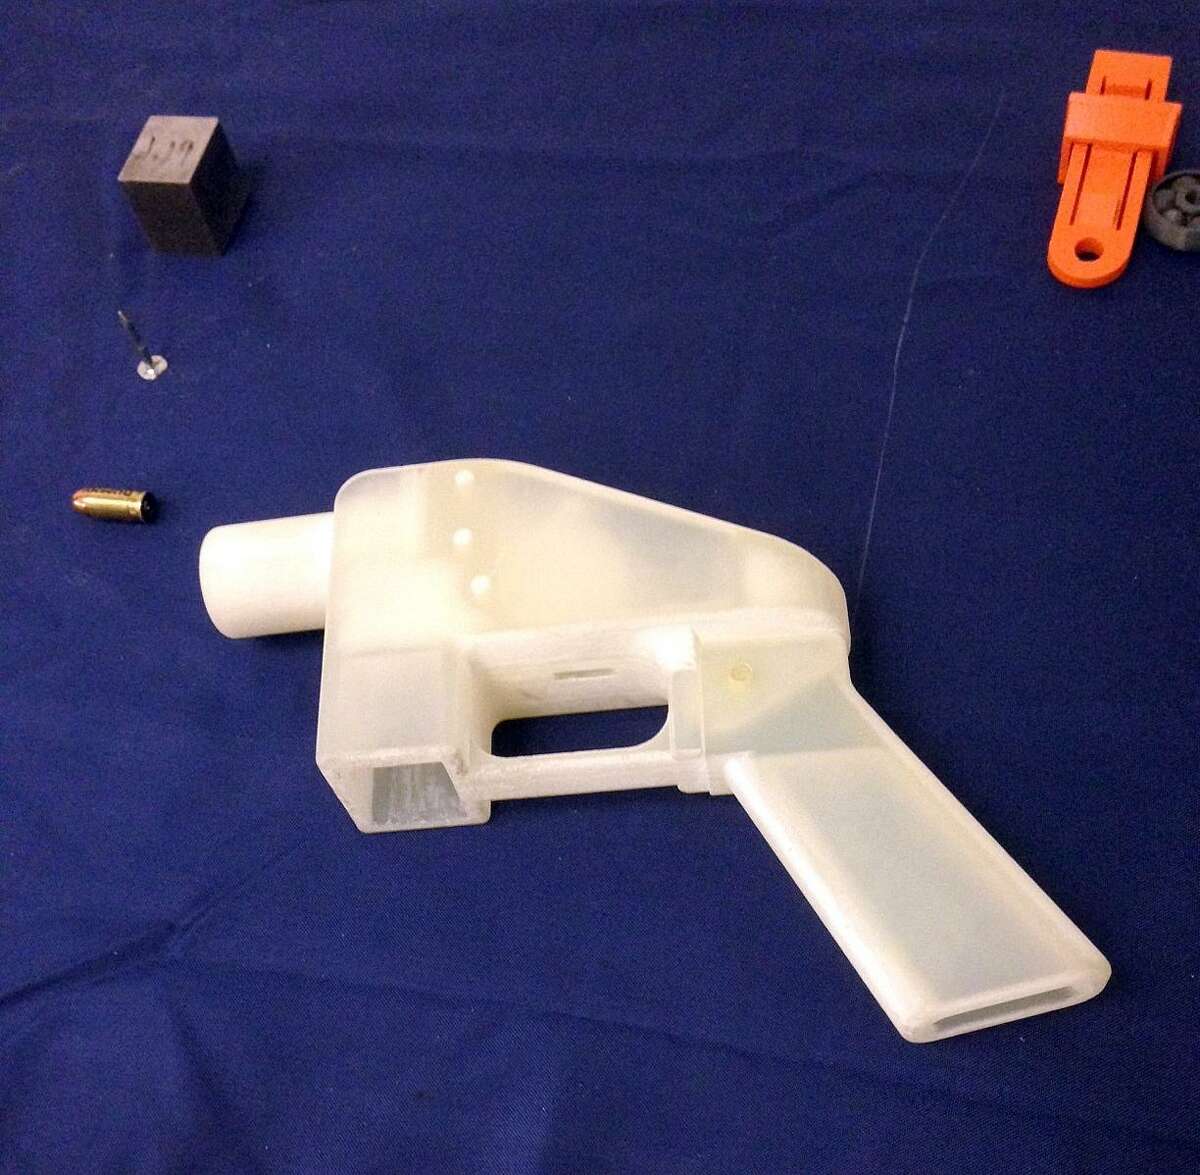 ATF version of ``The Liberator,” University of Texas law student Cody Wilson created a stir when he uploaded instructions for producing a 3-D handgun he dubbed the ``Liberator.”